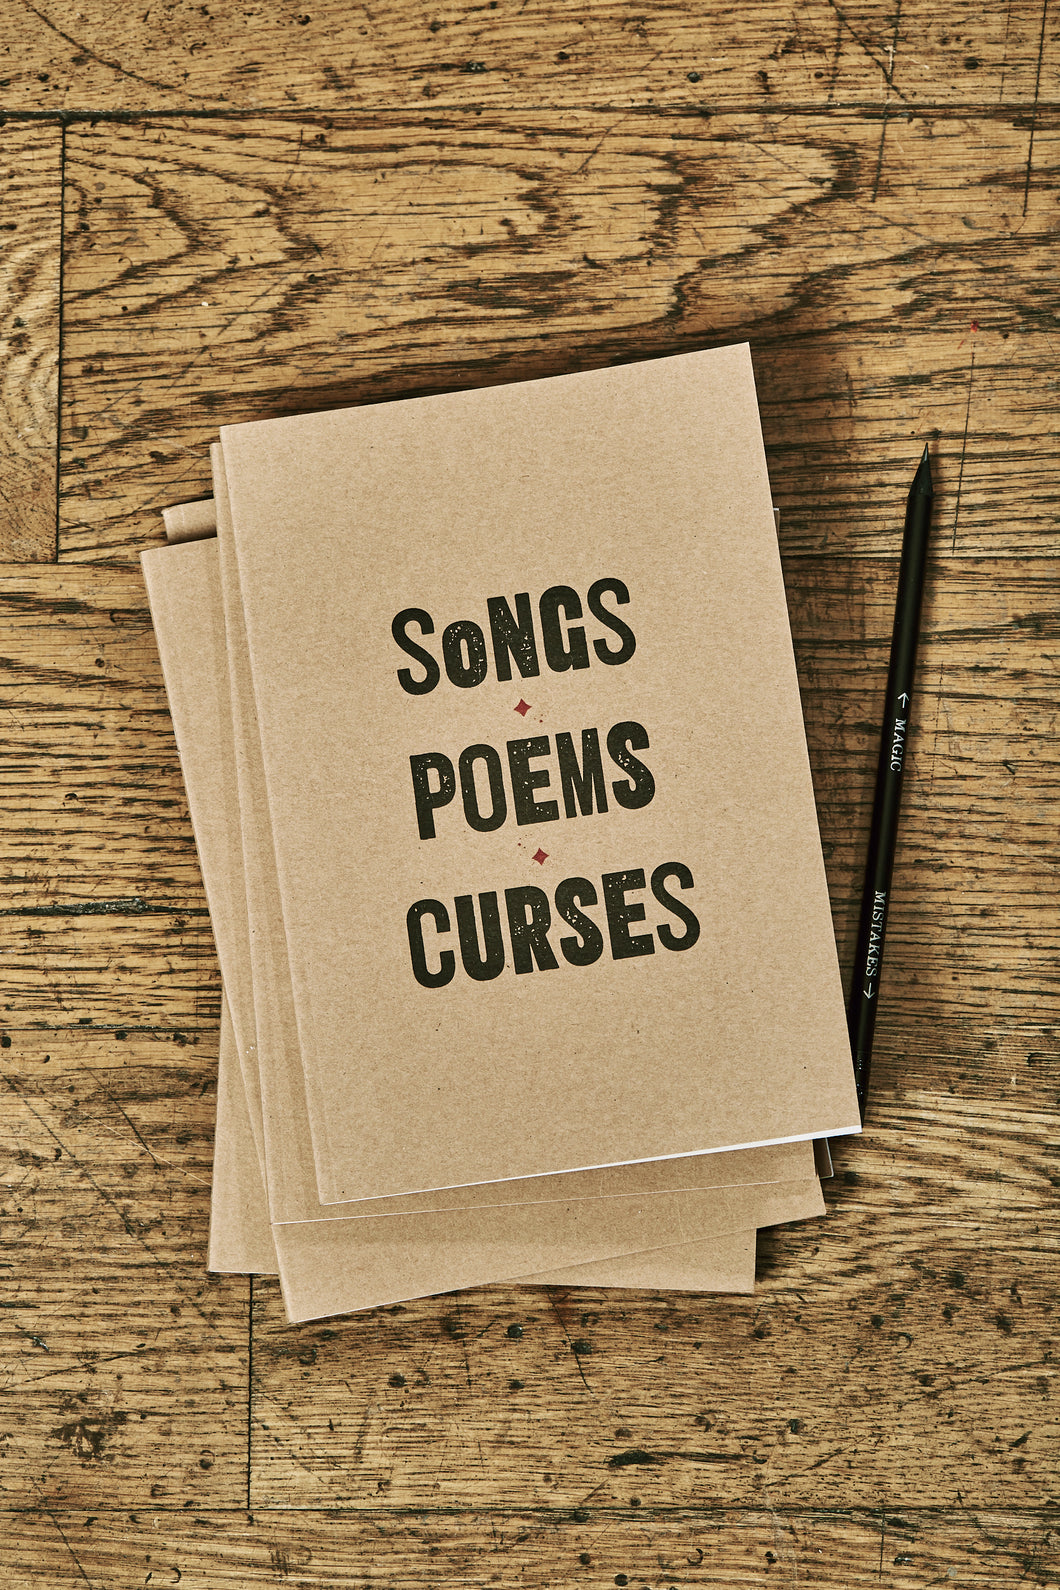 Image shows a few kraft card notebooks in a pile with the top one displaying the slogan 'SONGS, POEMS, CURSES'. Notebooks are shown with a Word Wand pencil.